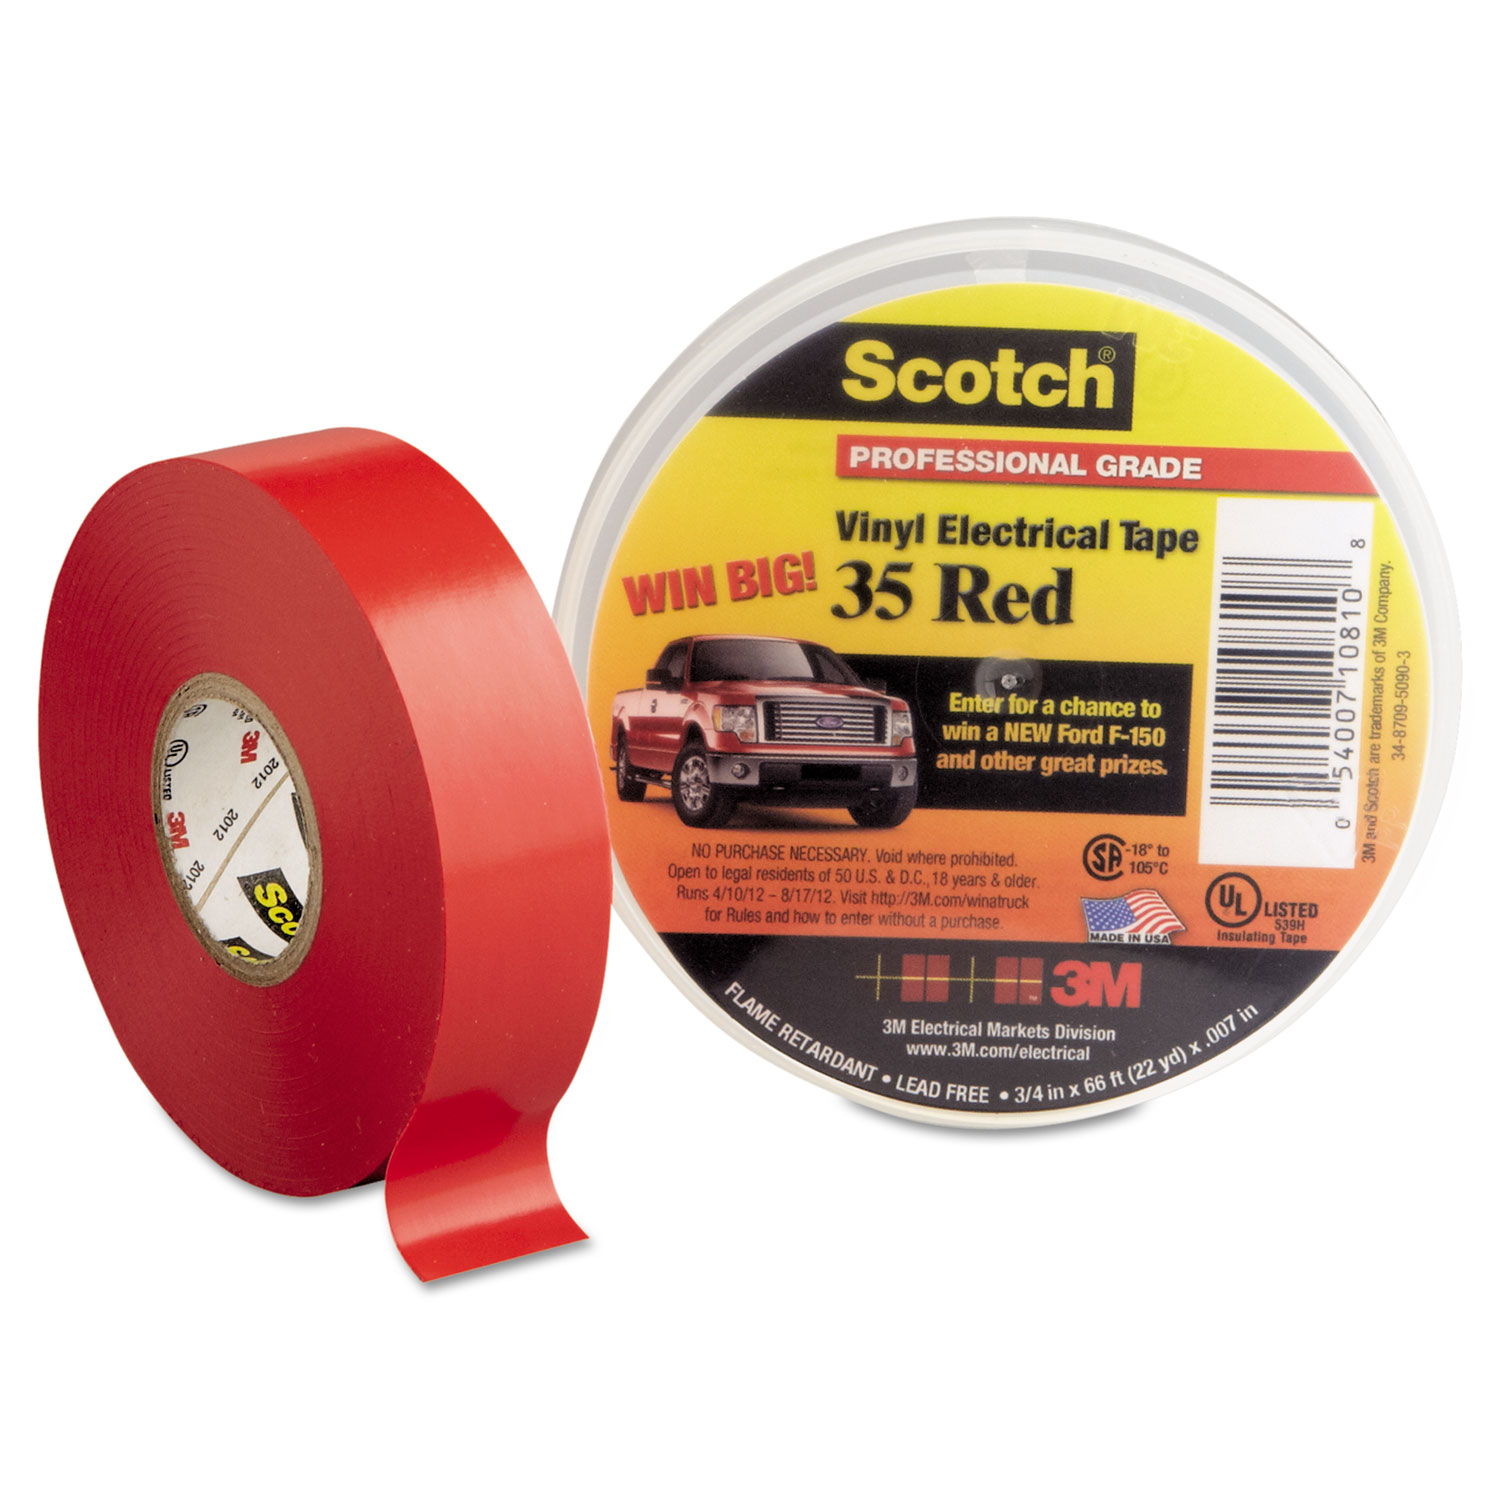  3M 10810-DL-2W Scotch 35 Vinyl Electrical Color Coding Tape, 3 Core, 0.75 x 66 ft, Red (MMM10810) 